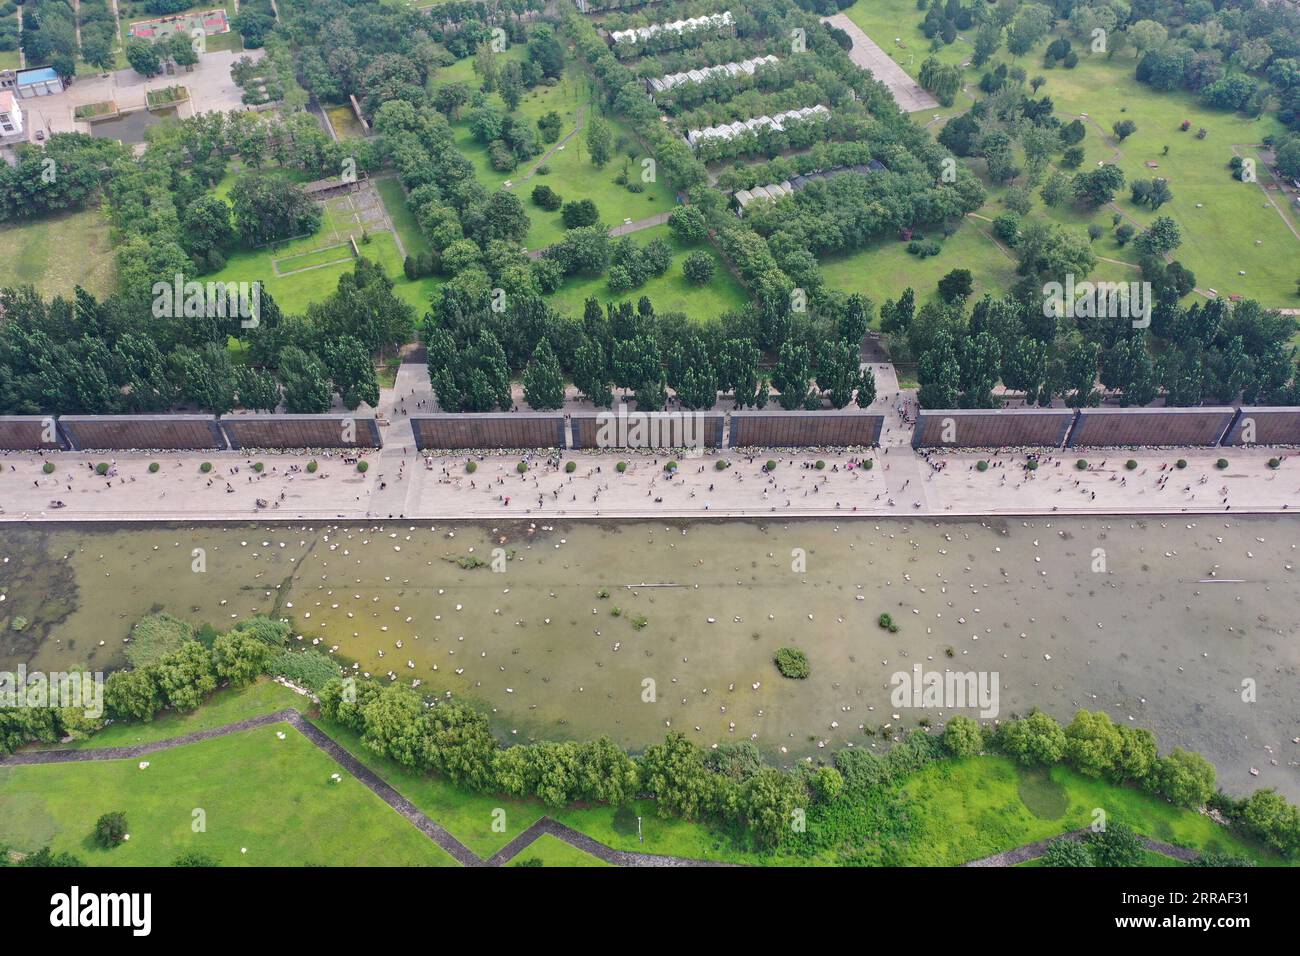 210728 -- TANGSHAN, July 28, 2021 -- Aerial photo taken on July 28, 2021 shows a view of the Tangshan Earthquake Memorial Park in Tangshan, north China s Hebei Province. Wednesday marks the 45th anniversary of the Tangshan earthquake. The 7.8-magnitude quake struck the city of Tangshan in Hebei Province on July 28, 1976, killing more than 240,000 people and destroying virtually all buildings.  CHINA-HEBEI-TANGSHAN EARTHQUAKE-45TH ANNIVERSARY CN MuxYu PUBLICATIONxNOTxINxCHN Stock Photo